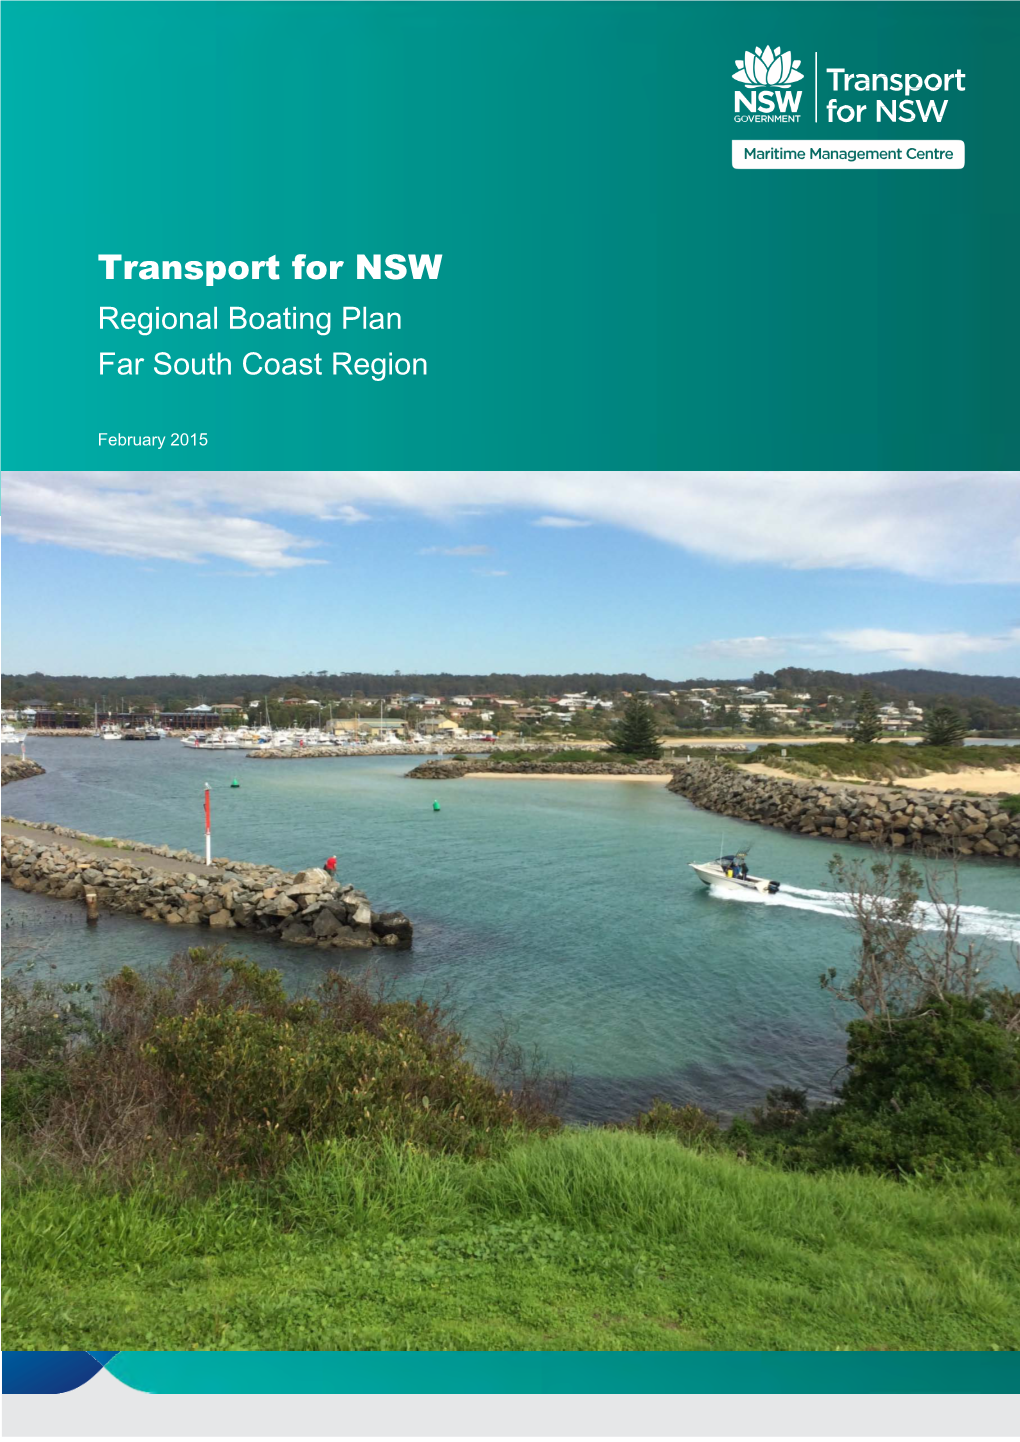 Far South Coast Regional Boating Plan Has Been Developed As Part of a Major NSW Government Initiative to Boost the Experience of Recreational Boating Across the State